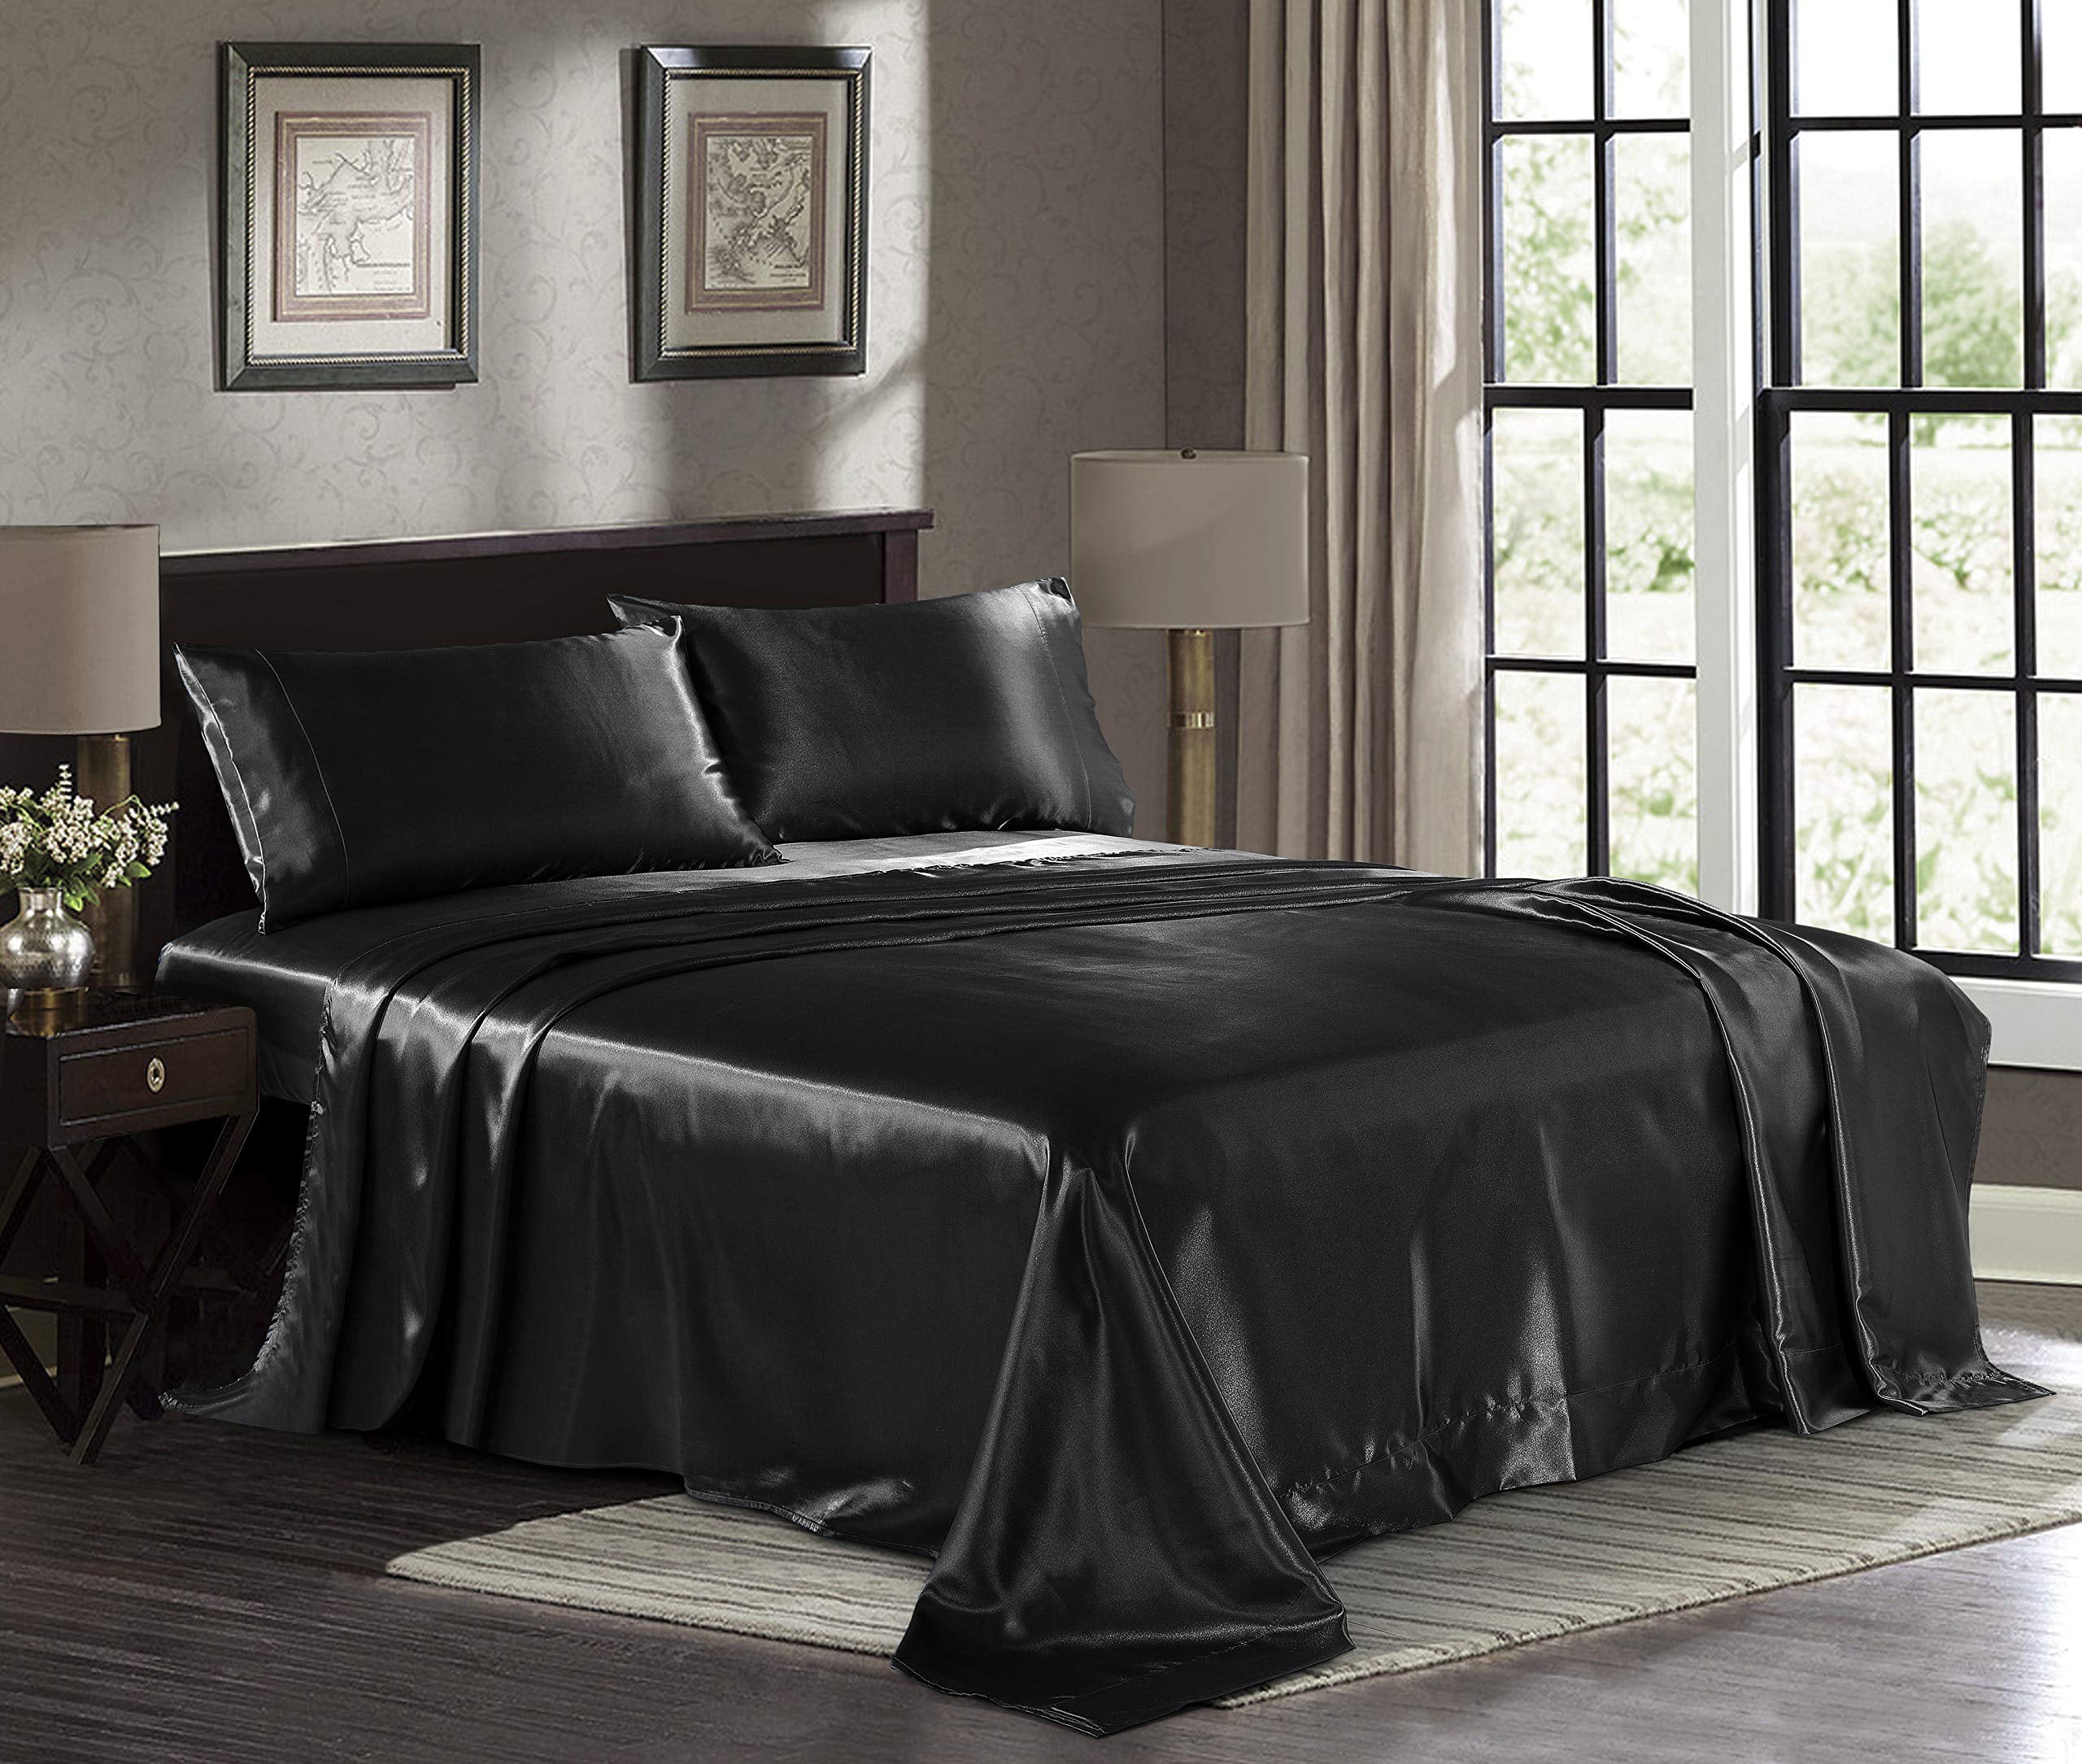 20 Beautiful Black Bed Linens Home Design Lover